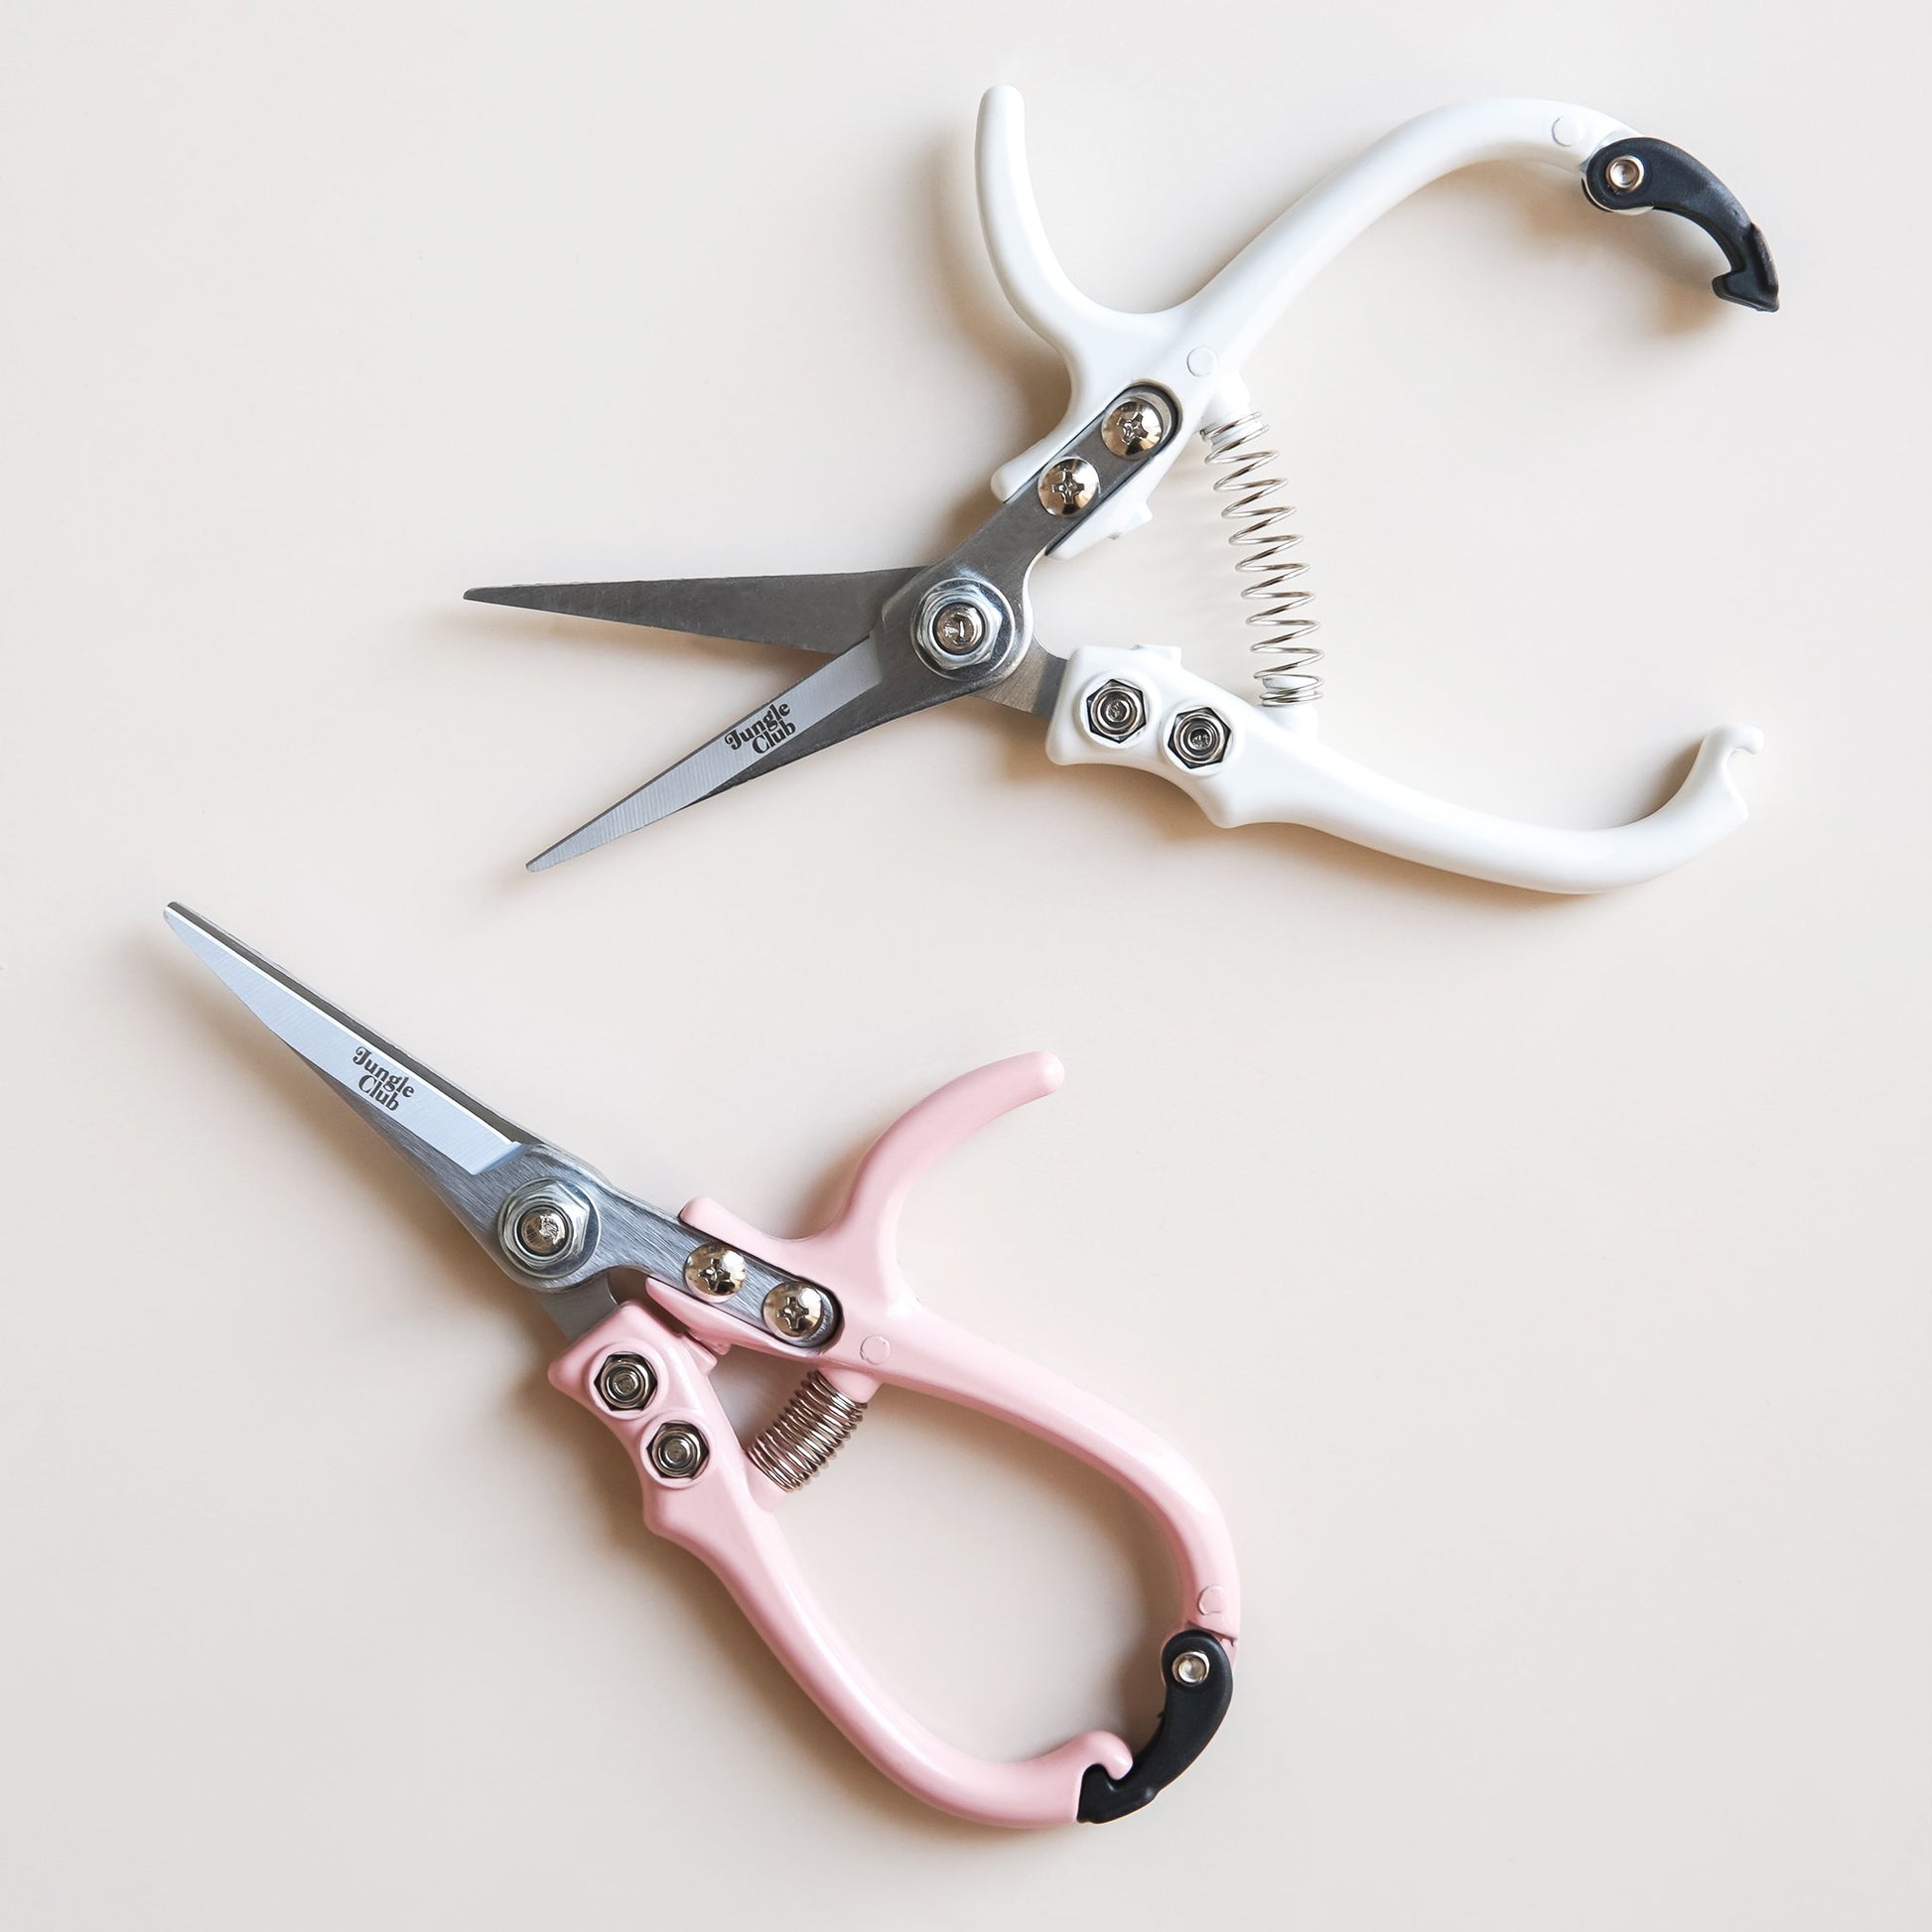 On a cream background is a white pair of pruning shears with silver metal and fixtures and small text on the metal part of the shears that reads, "Jungle Club" in small black letters. In this picture they are photographed next to the same shears in a light pink shade.